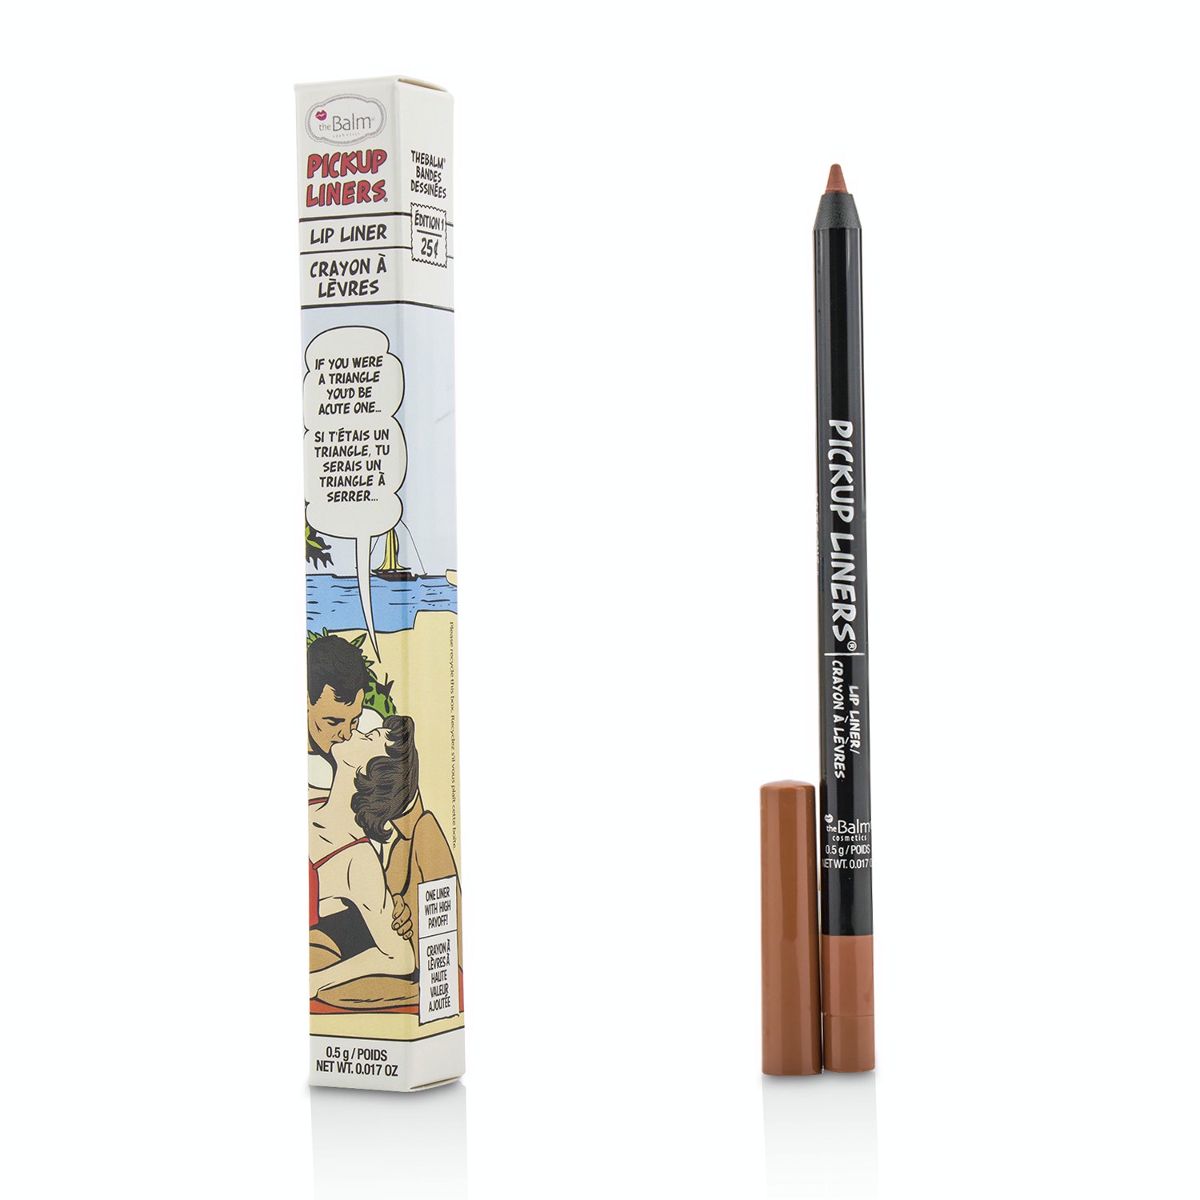 Pickup Liners - #Acute One TheBalm Image